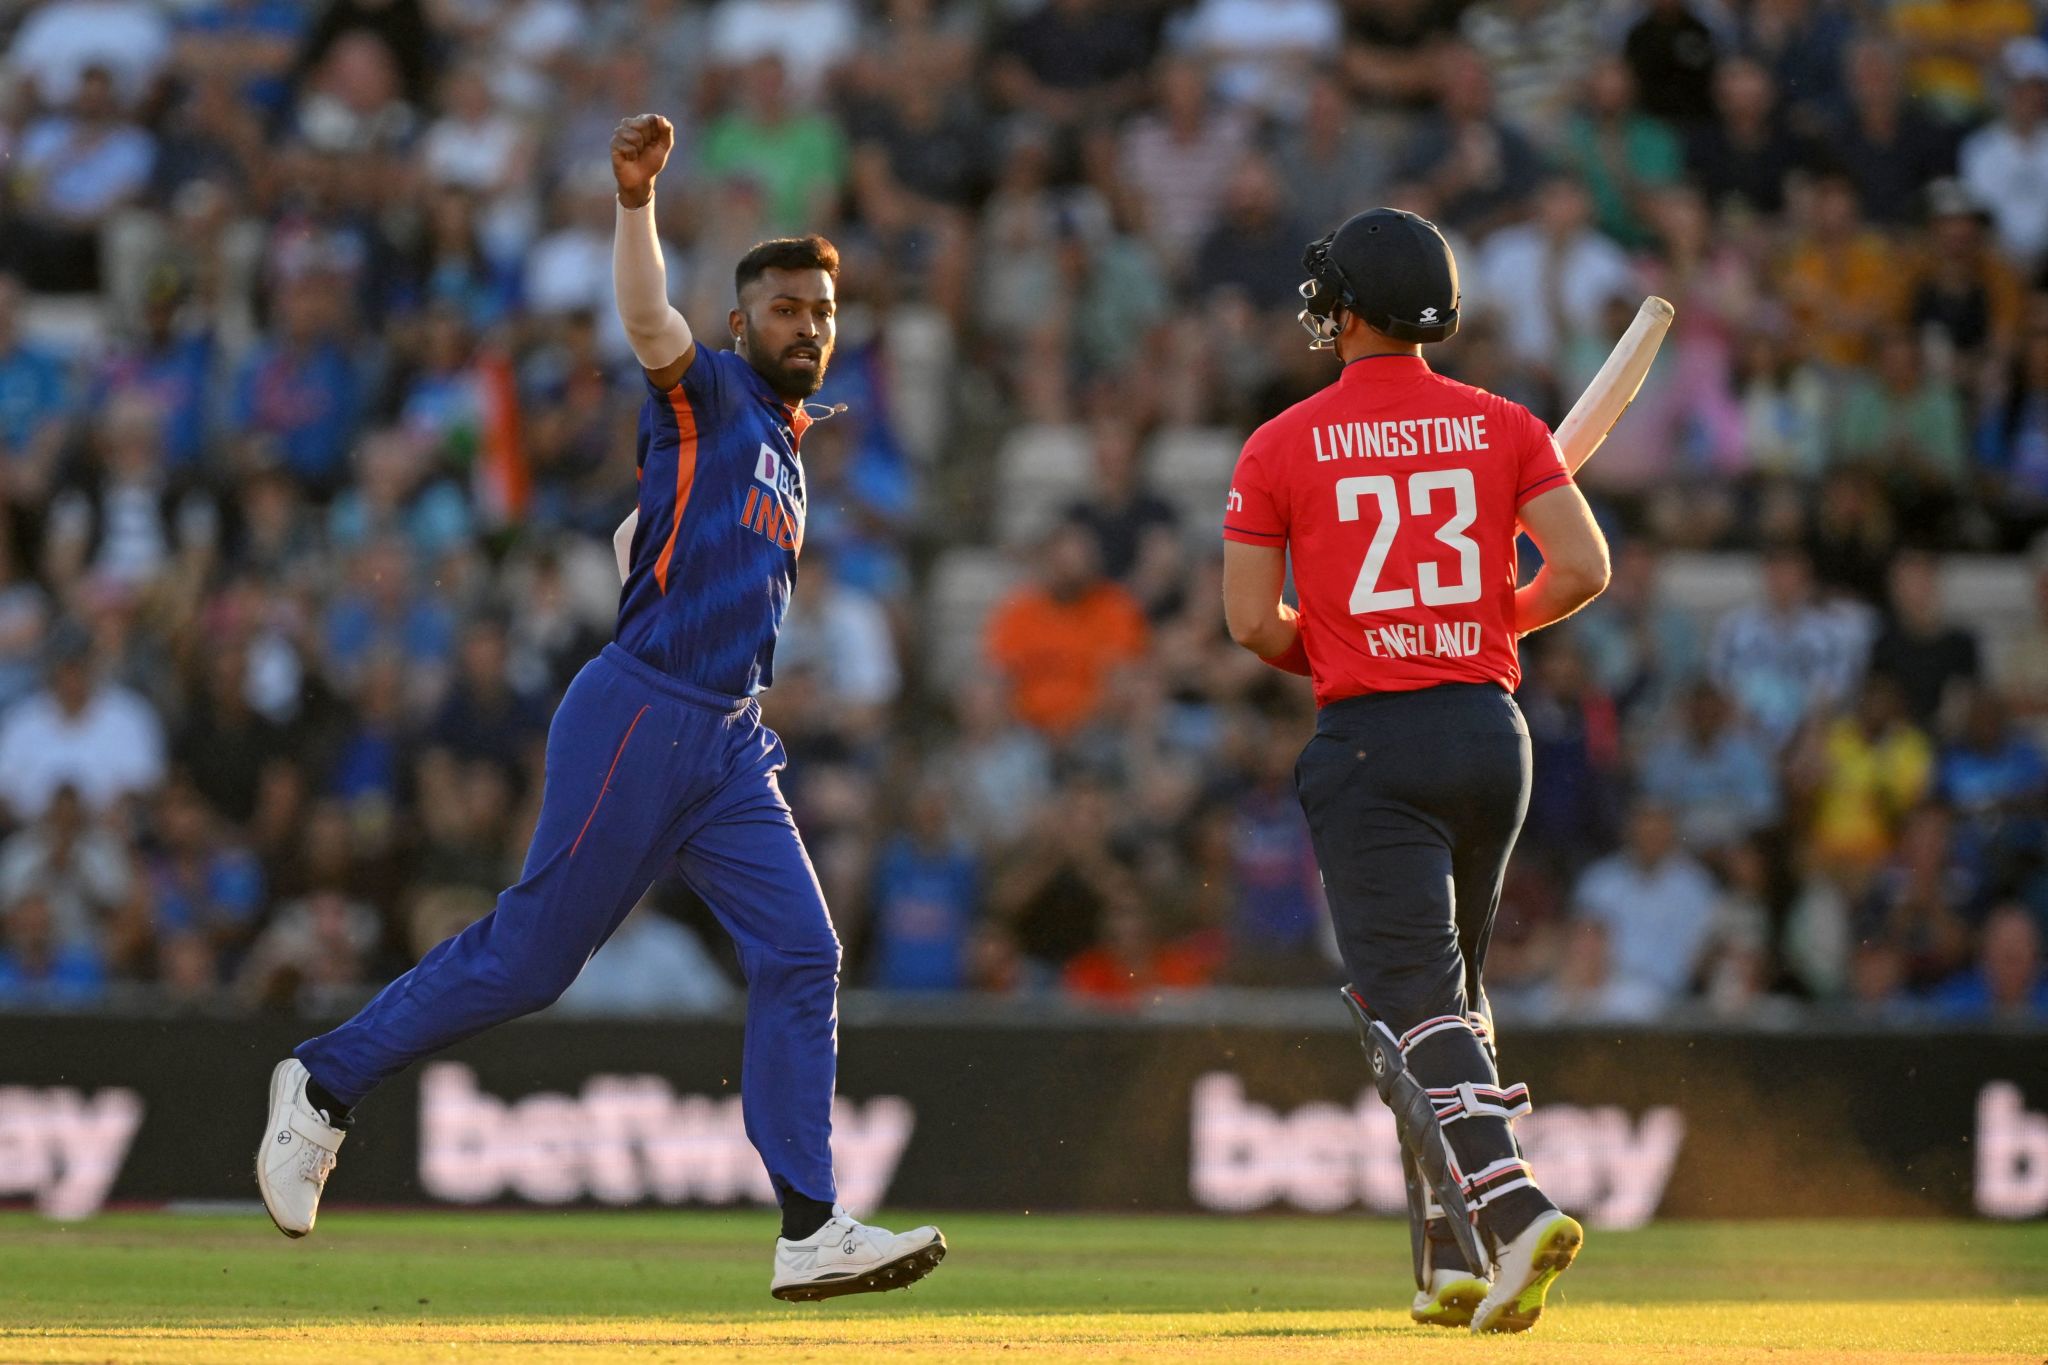 Hardik Pandya’s all-round performance leads India to a T20 victory over England.